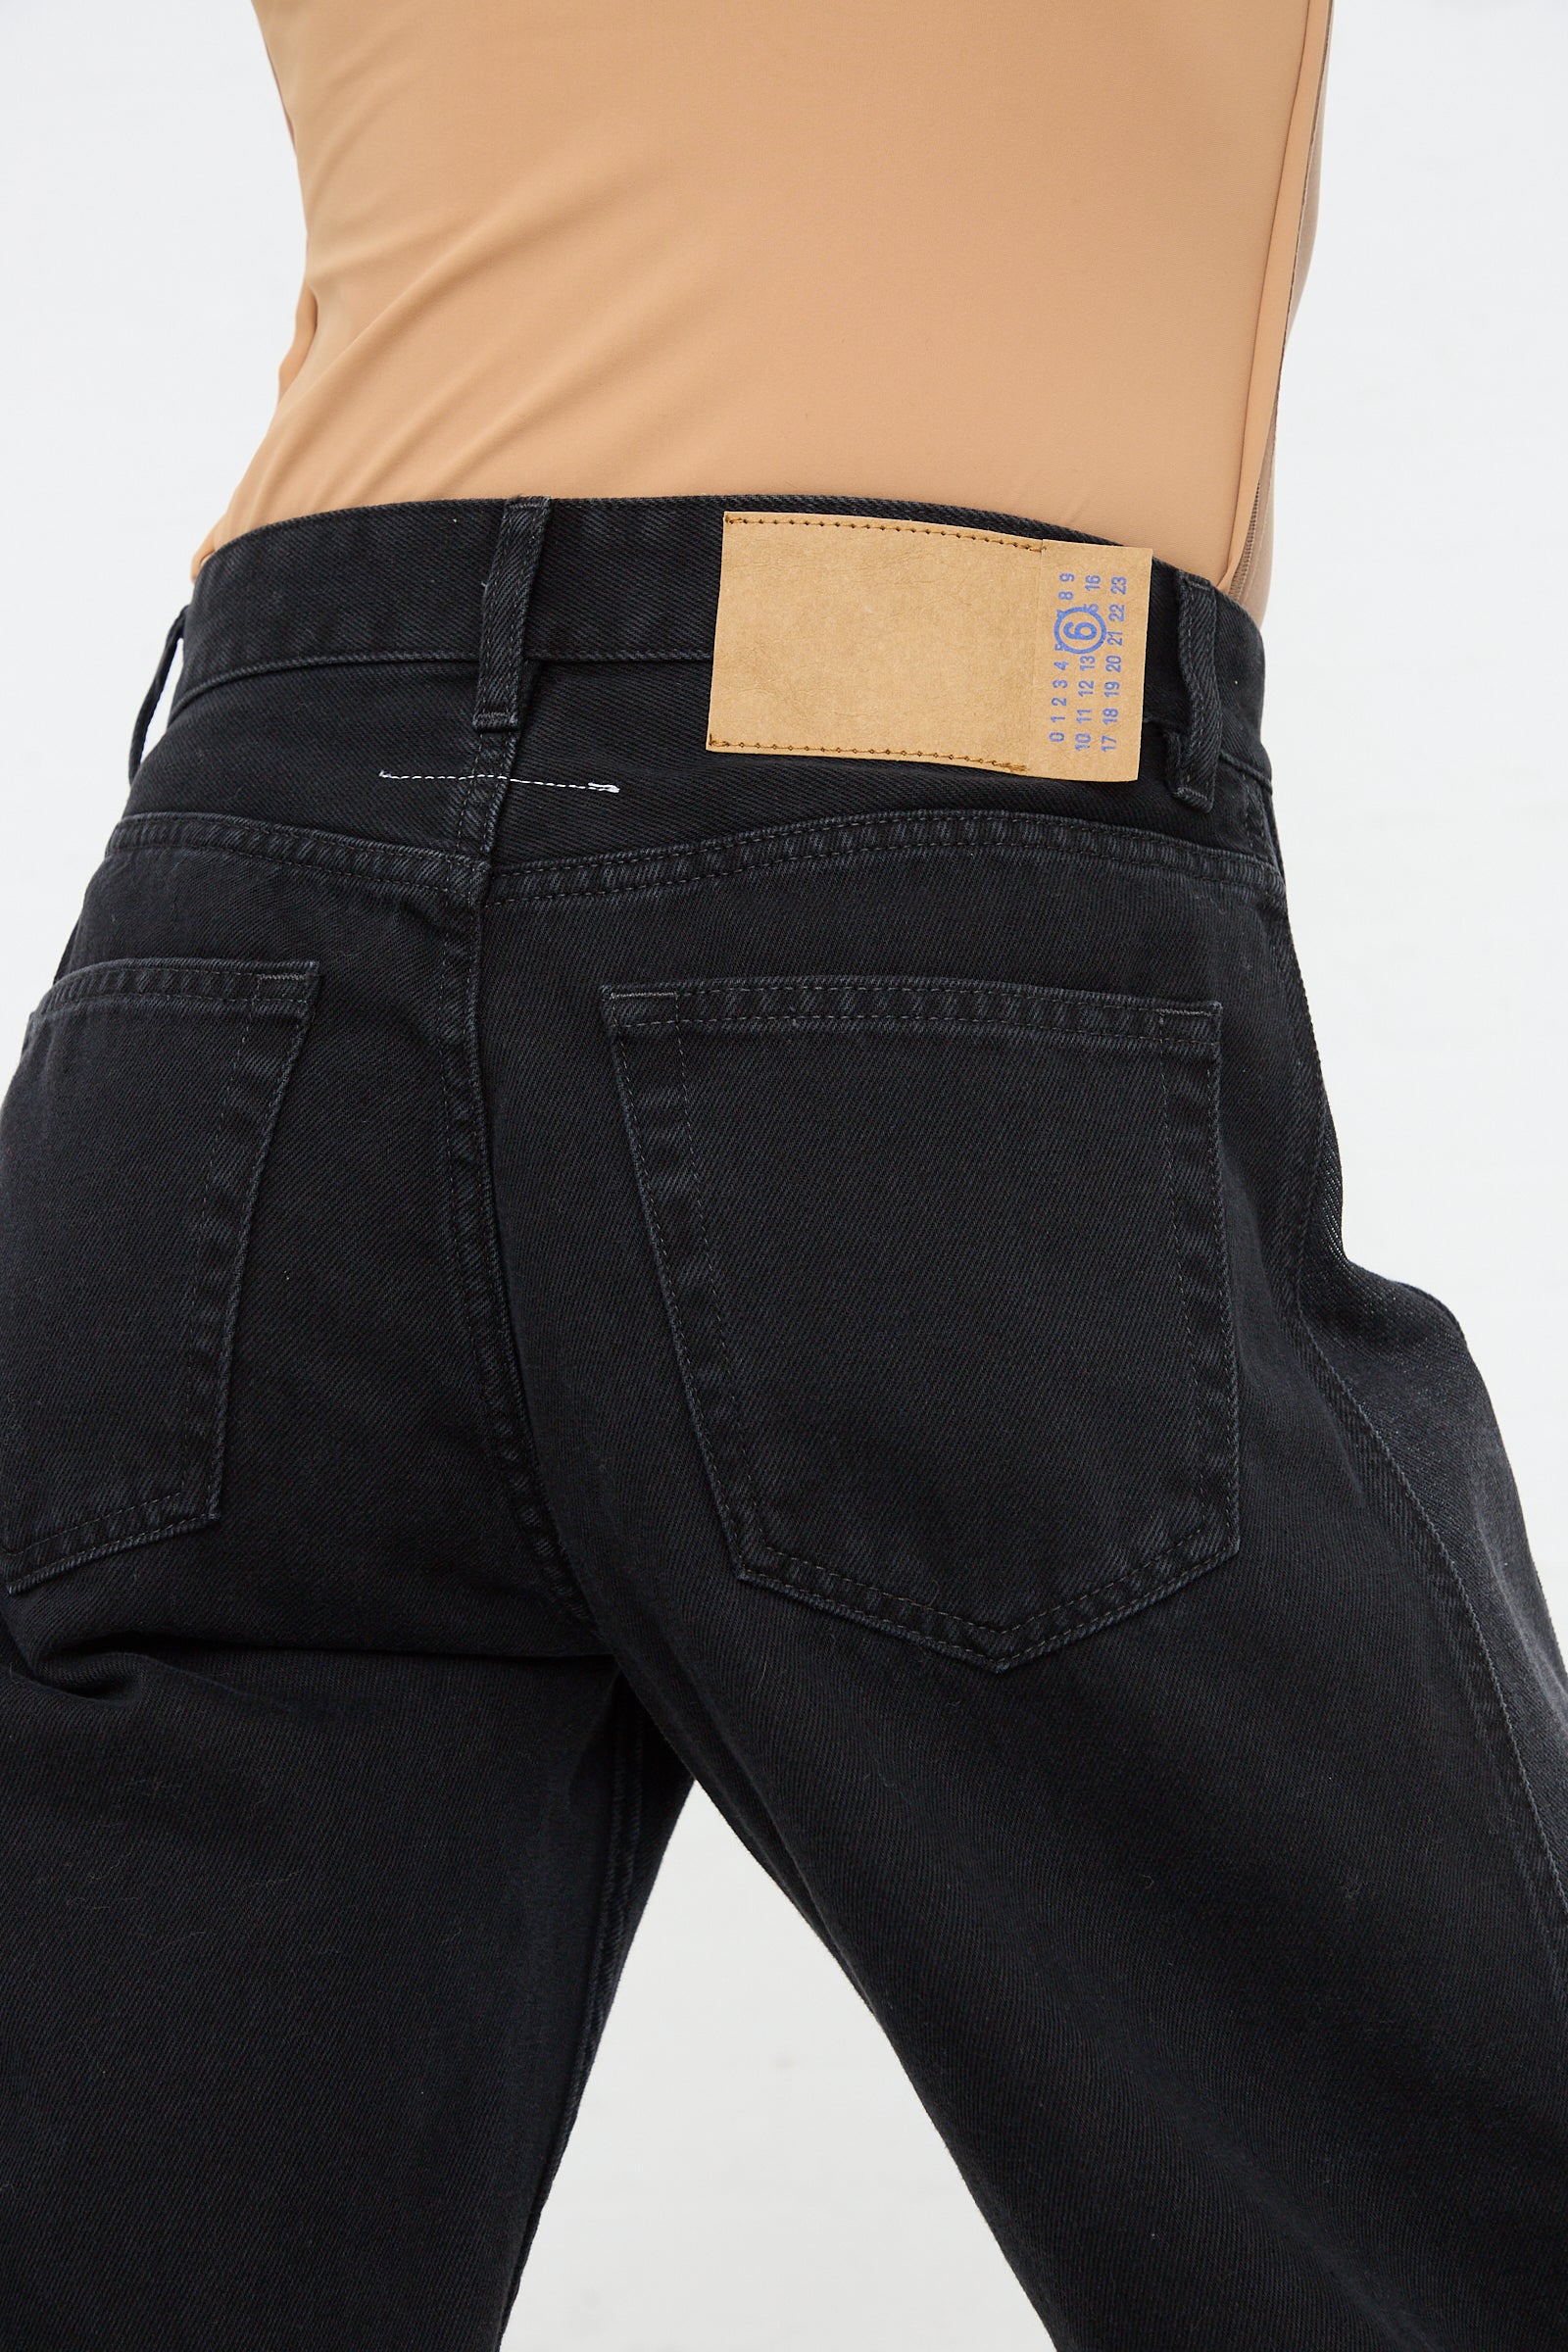 Close-up of a person wearing MM6's 5 Pocket Pant in Black with a Maison Martin Margiela beige tag on the back pocket.